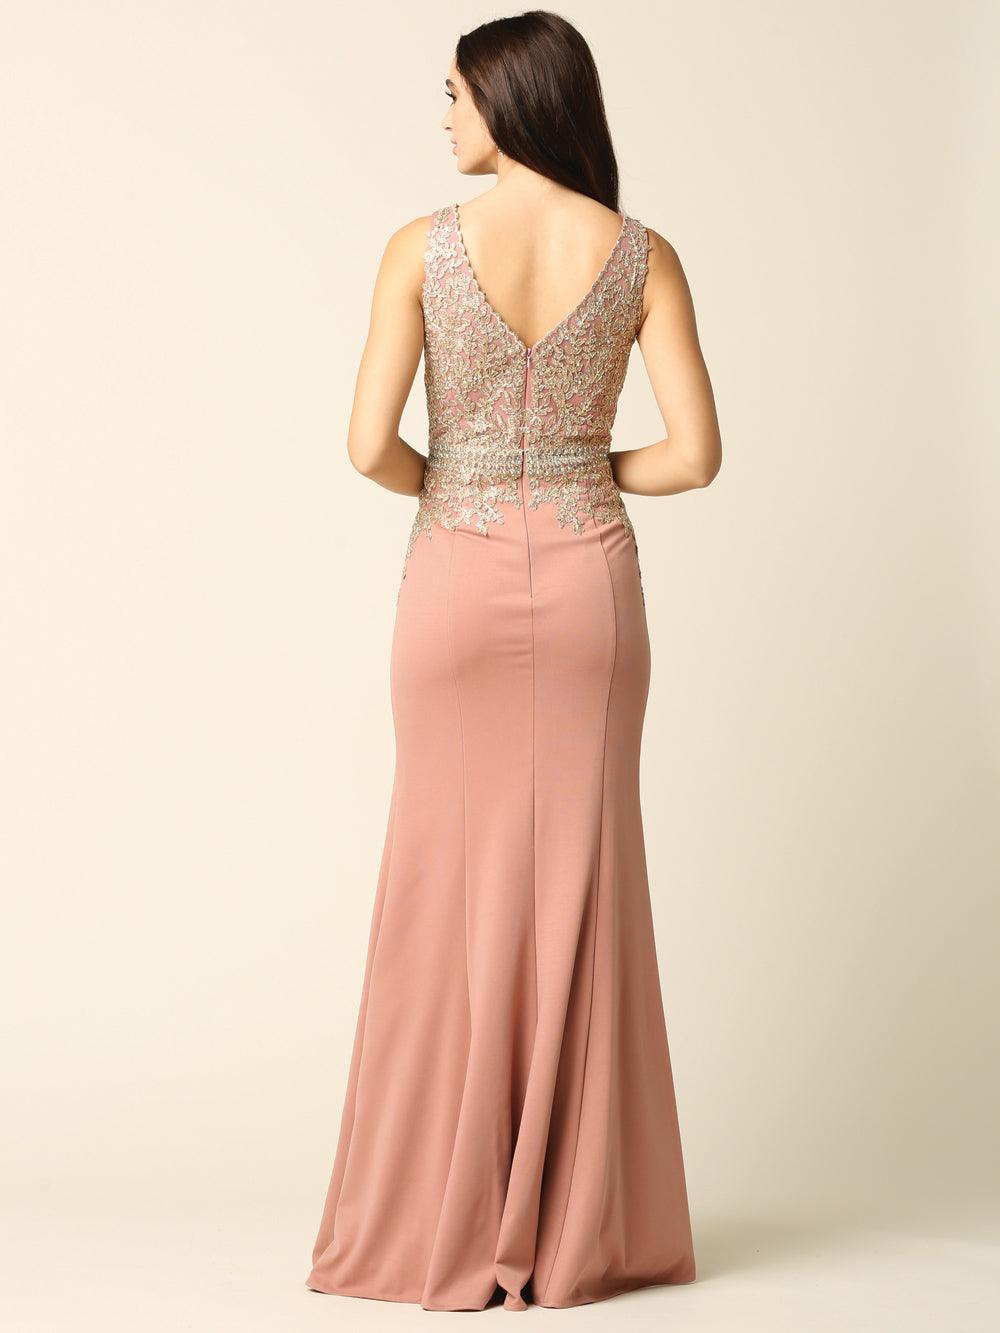 Mother of the Bride Long Formal Sleeveless Dress - The Dress Outlet